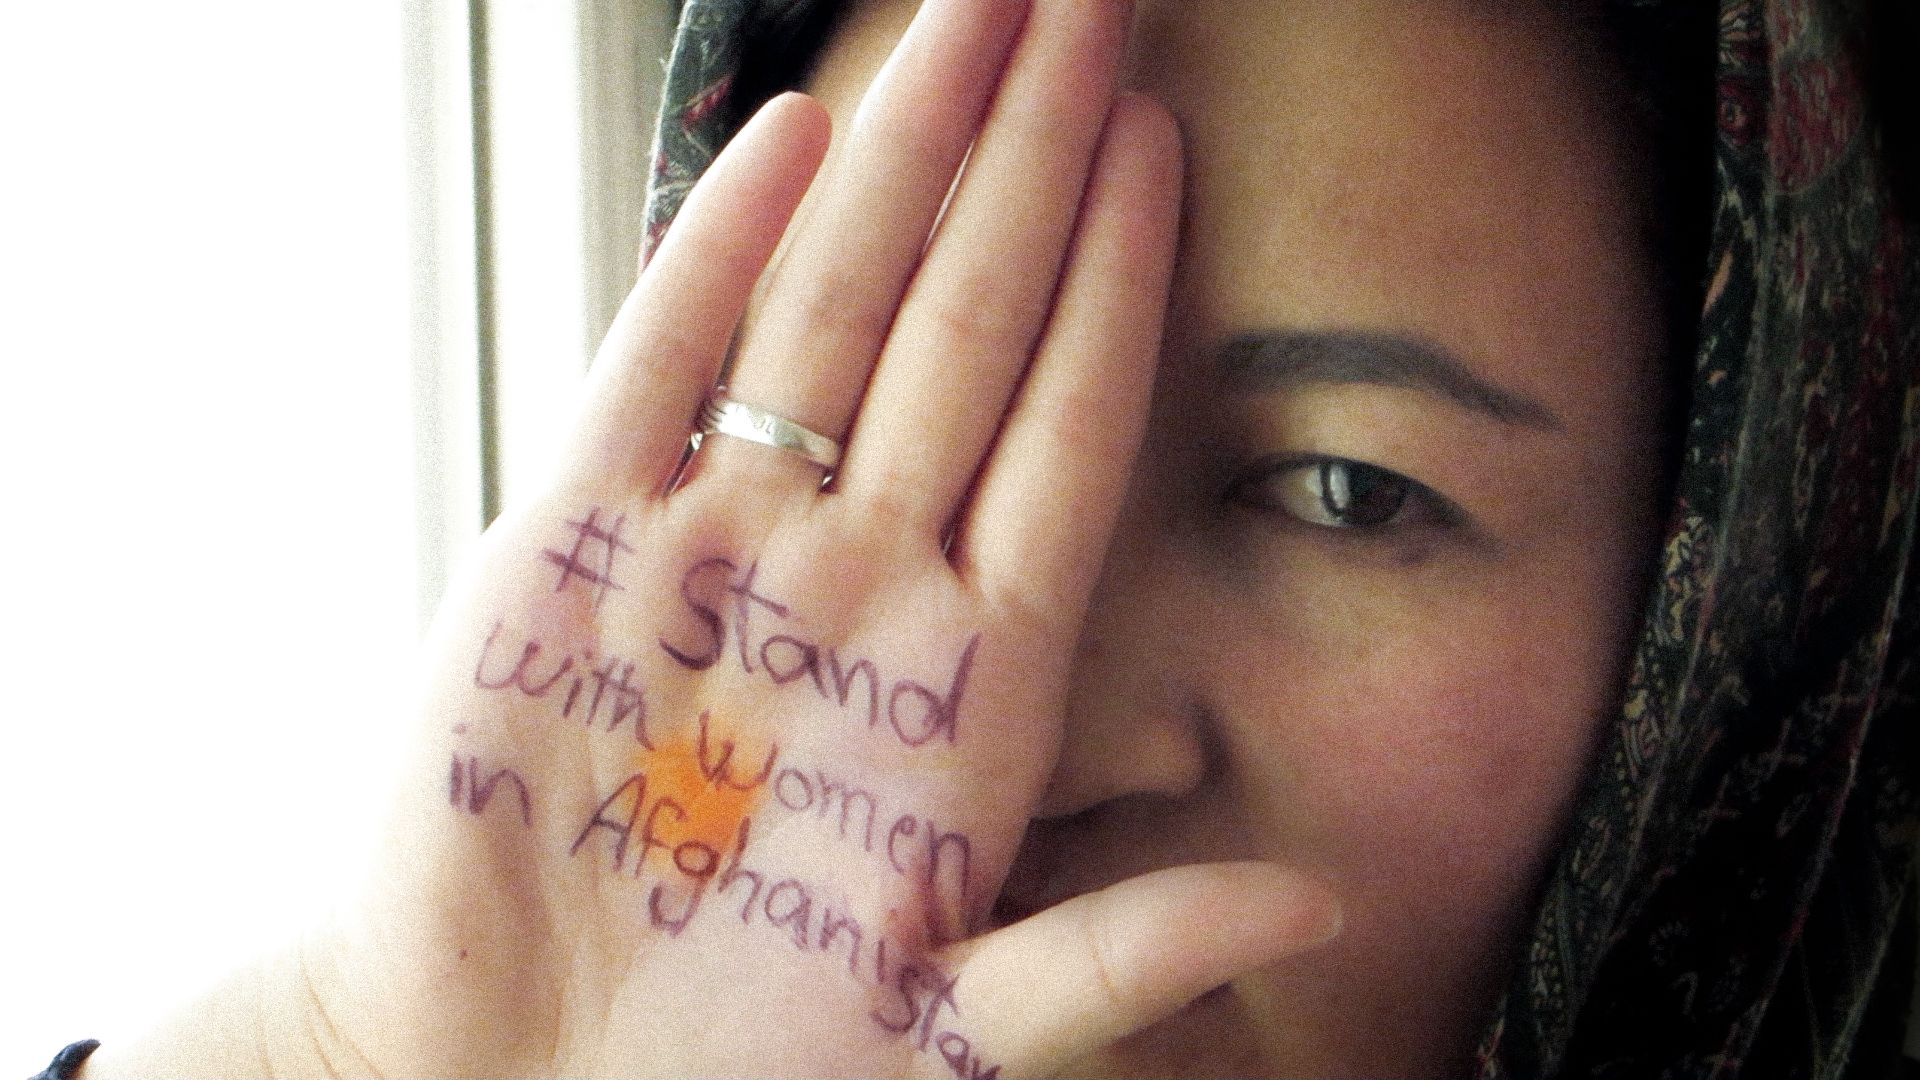 Stand with Women in Afghanistan written on the hand of a woman in the movie Bread and Roses